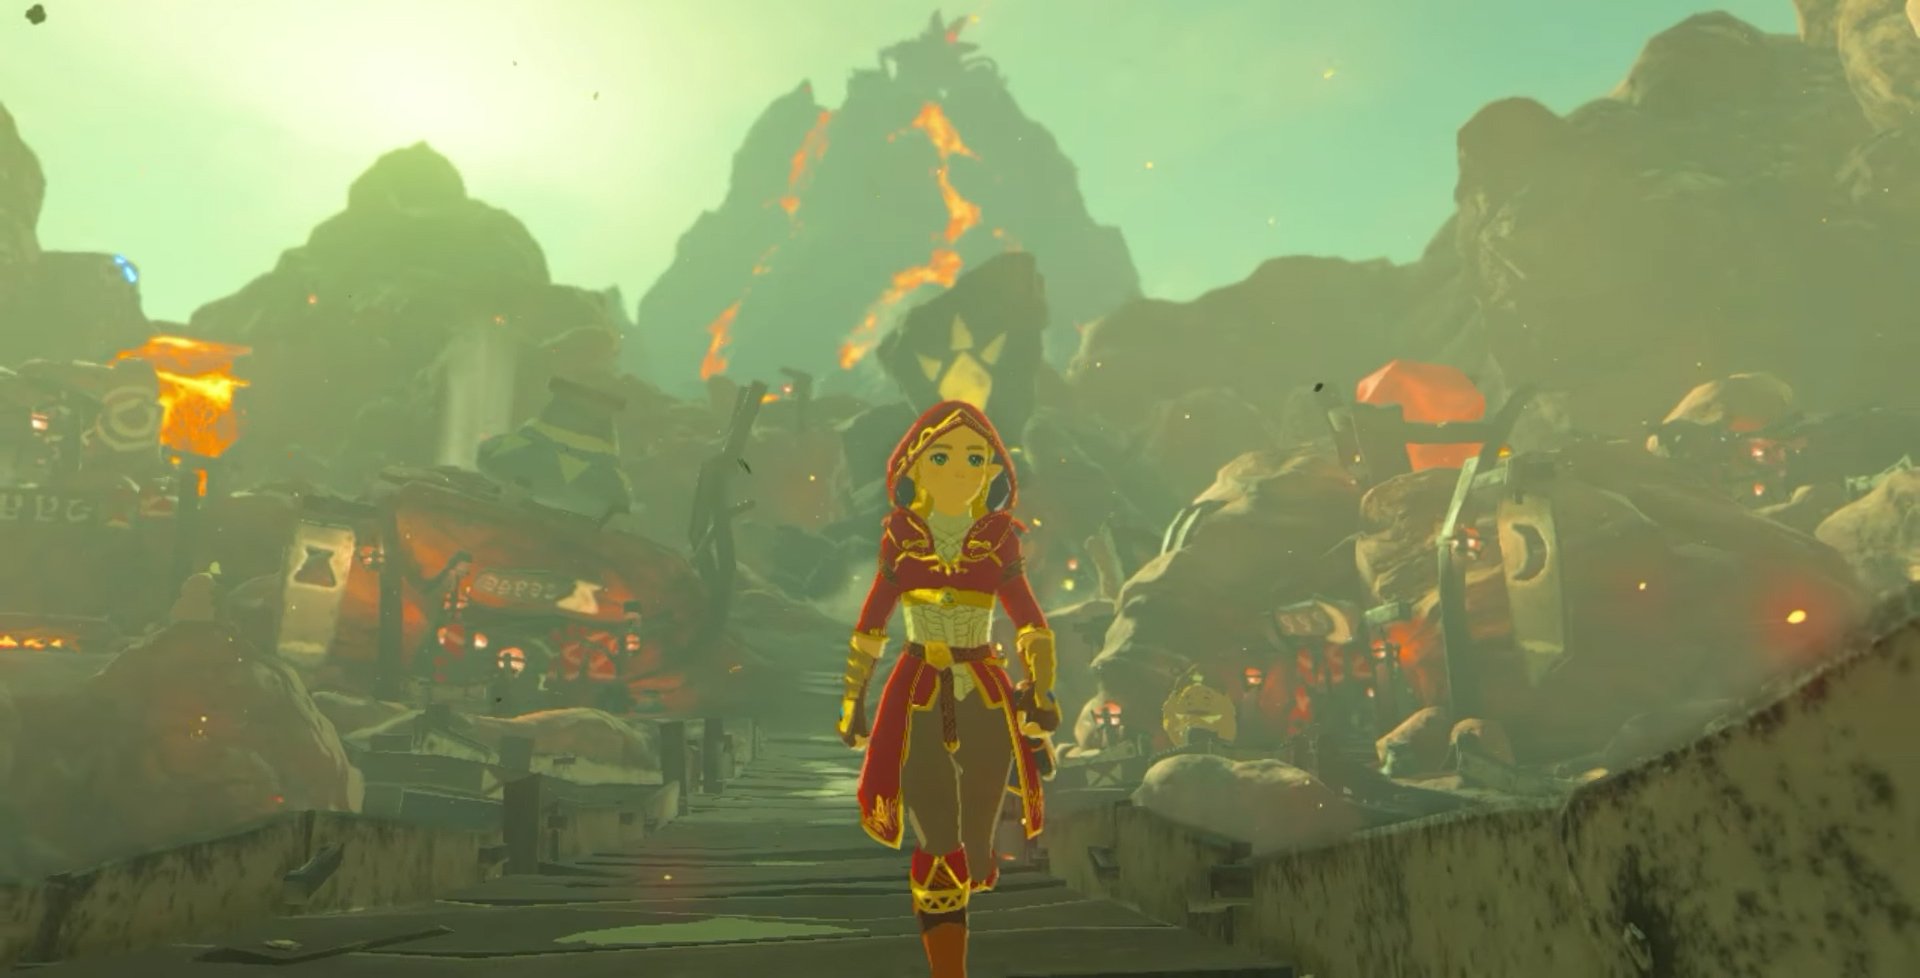 The Legend of Zelda: Breath of the Wild - Mods and community